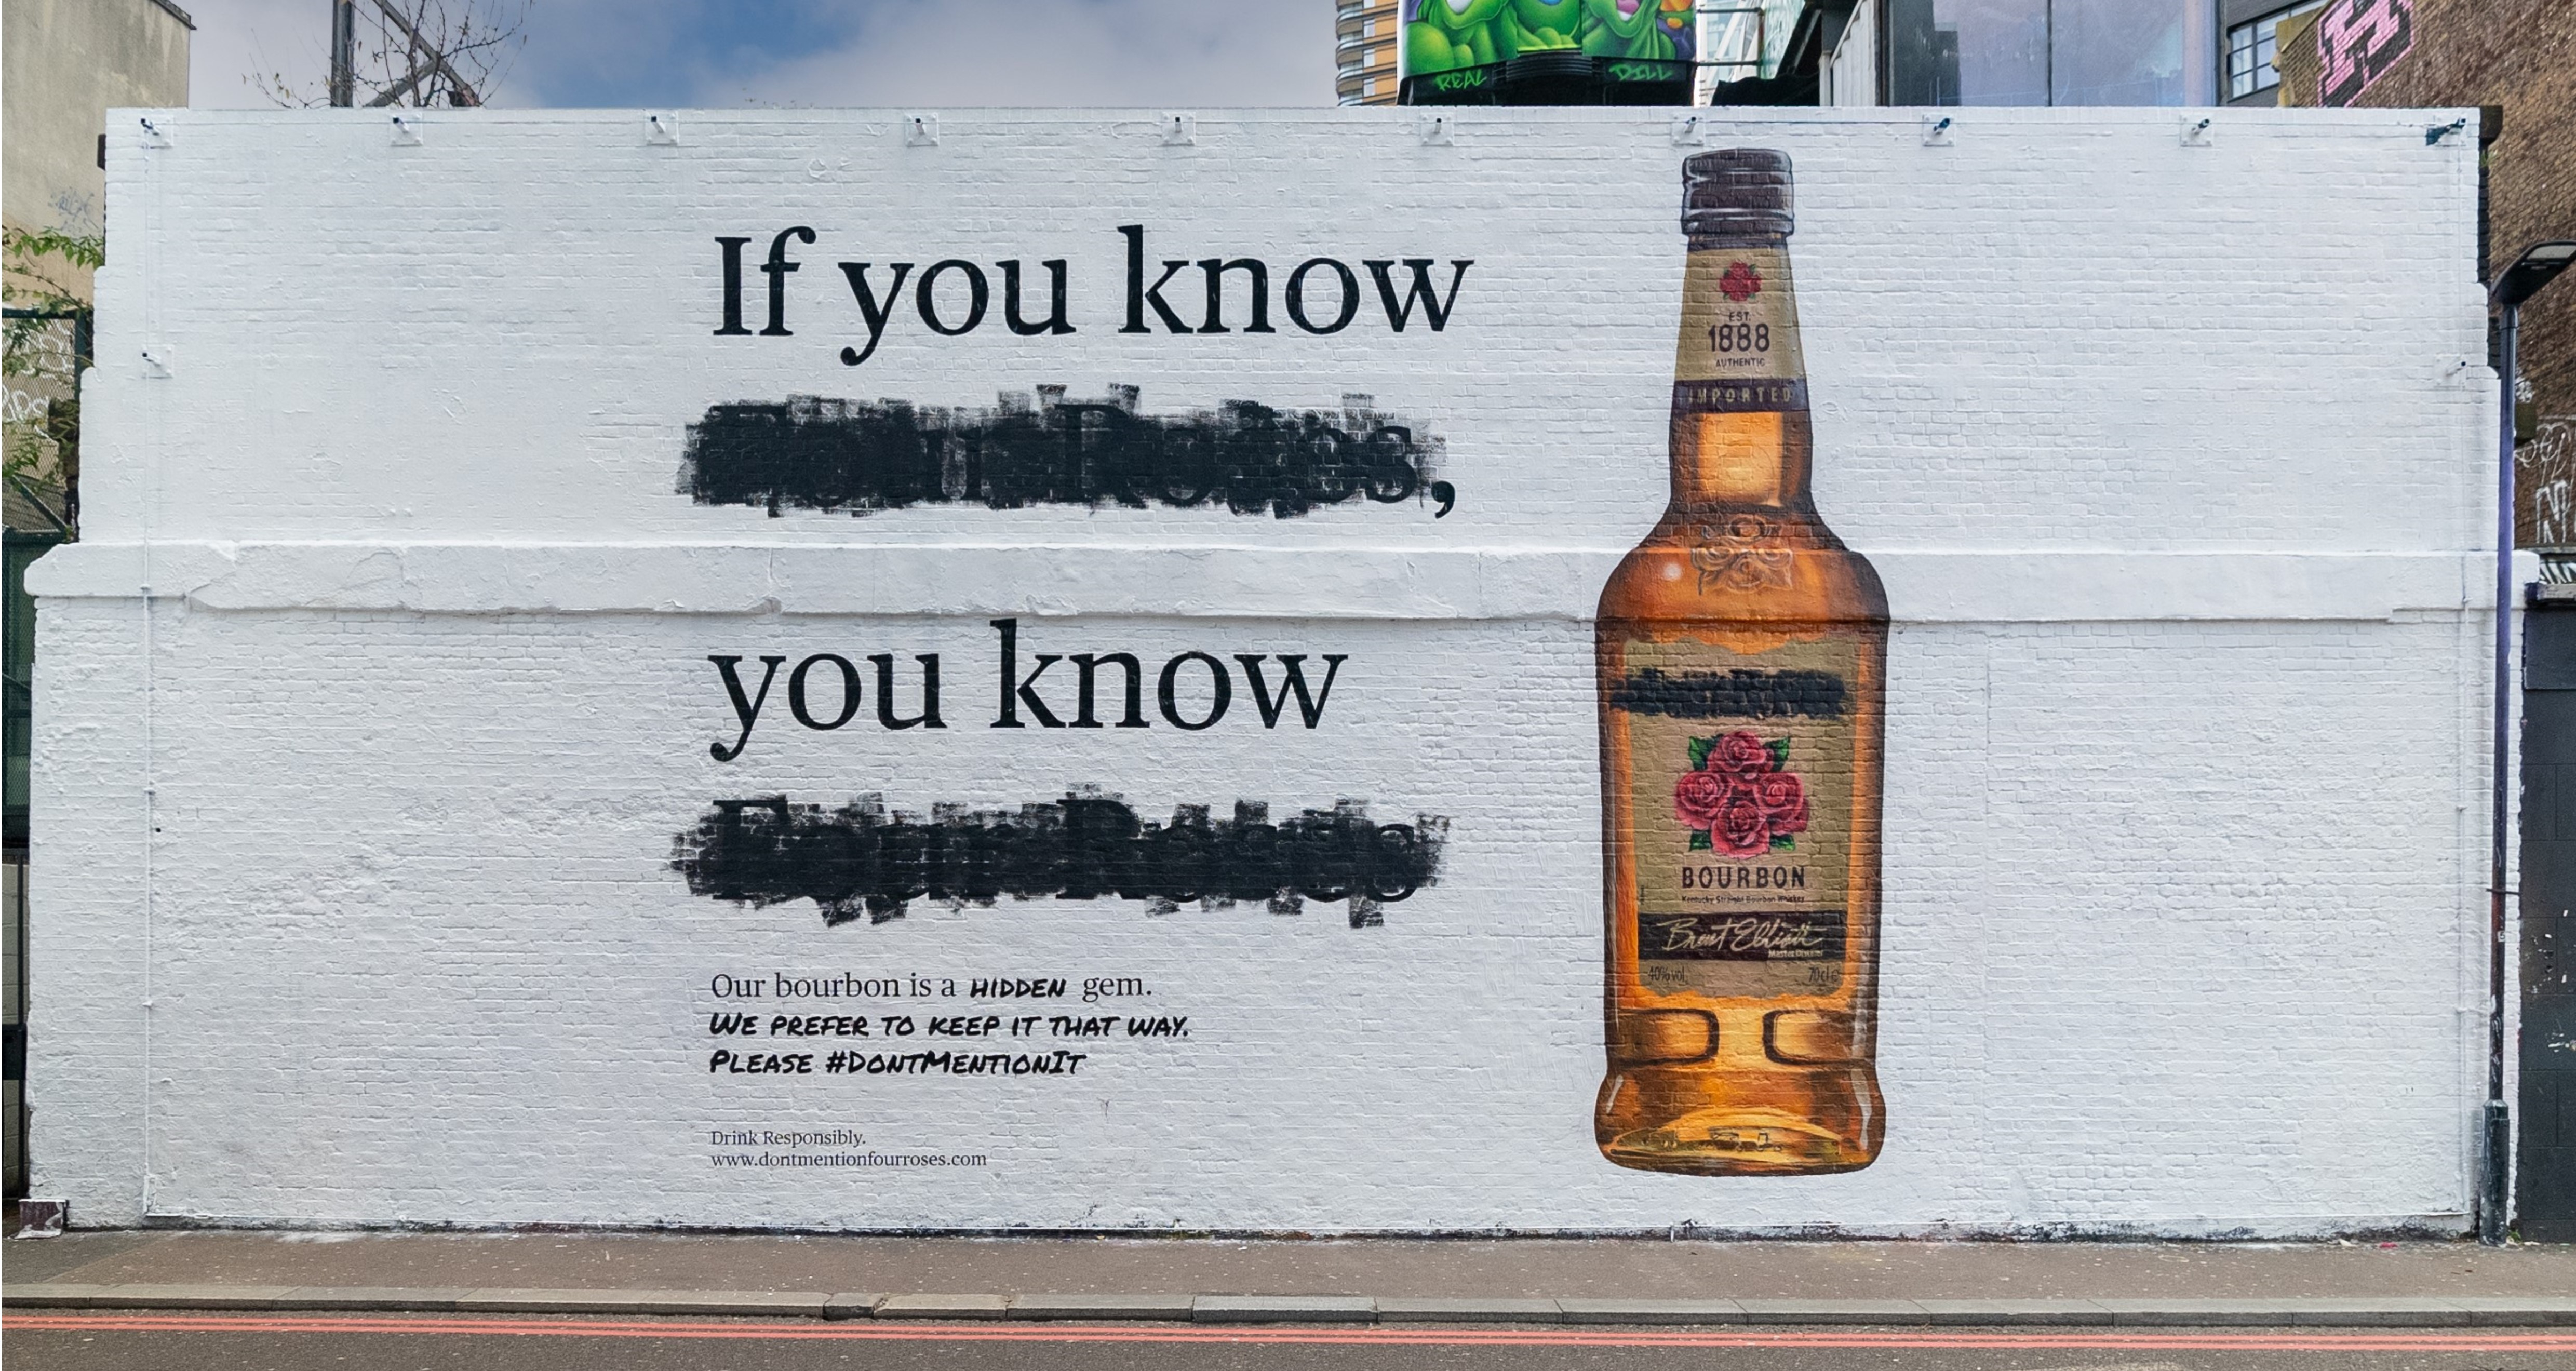 Pretty Secrets unveils their Brand Advertising Campaign with Print